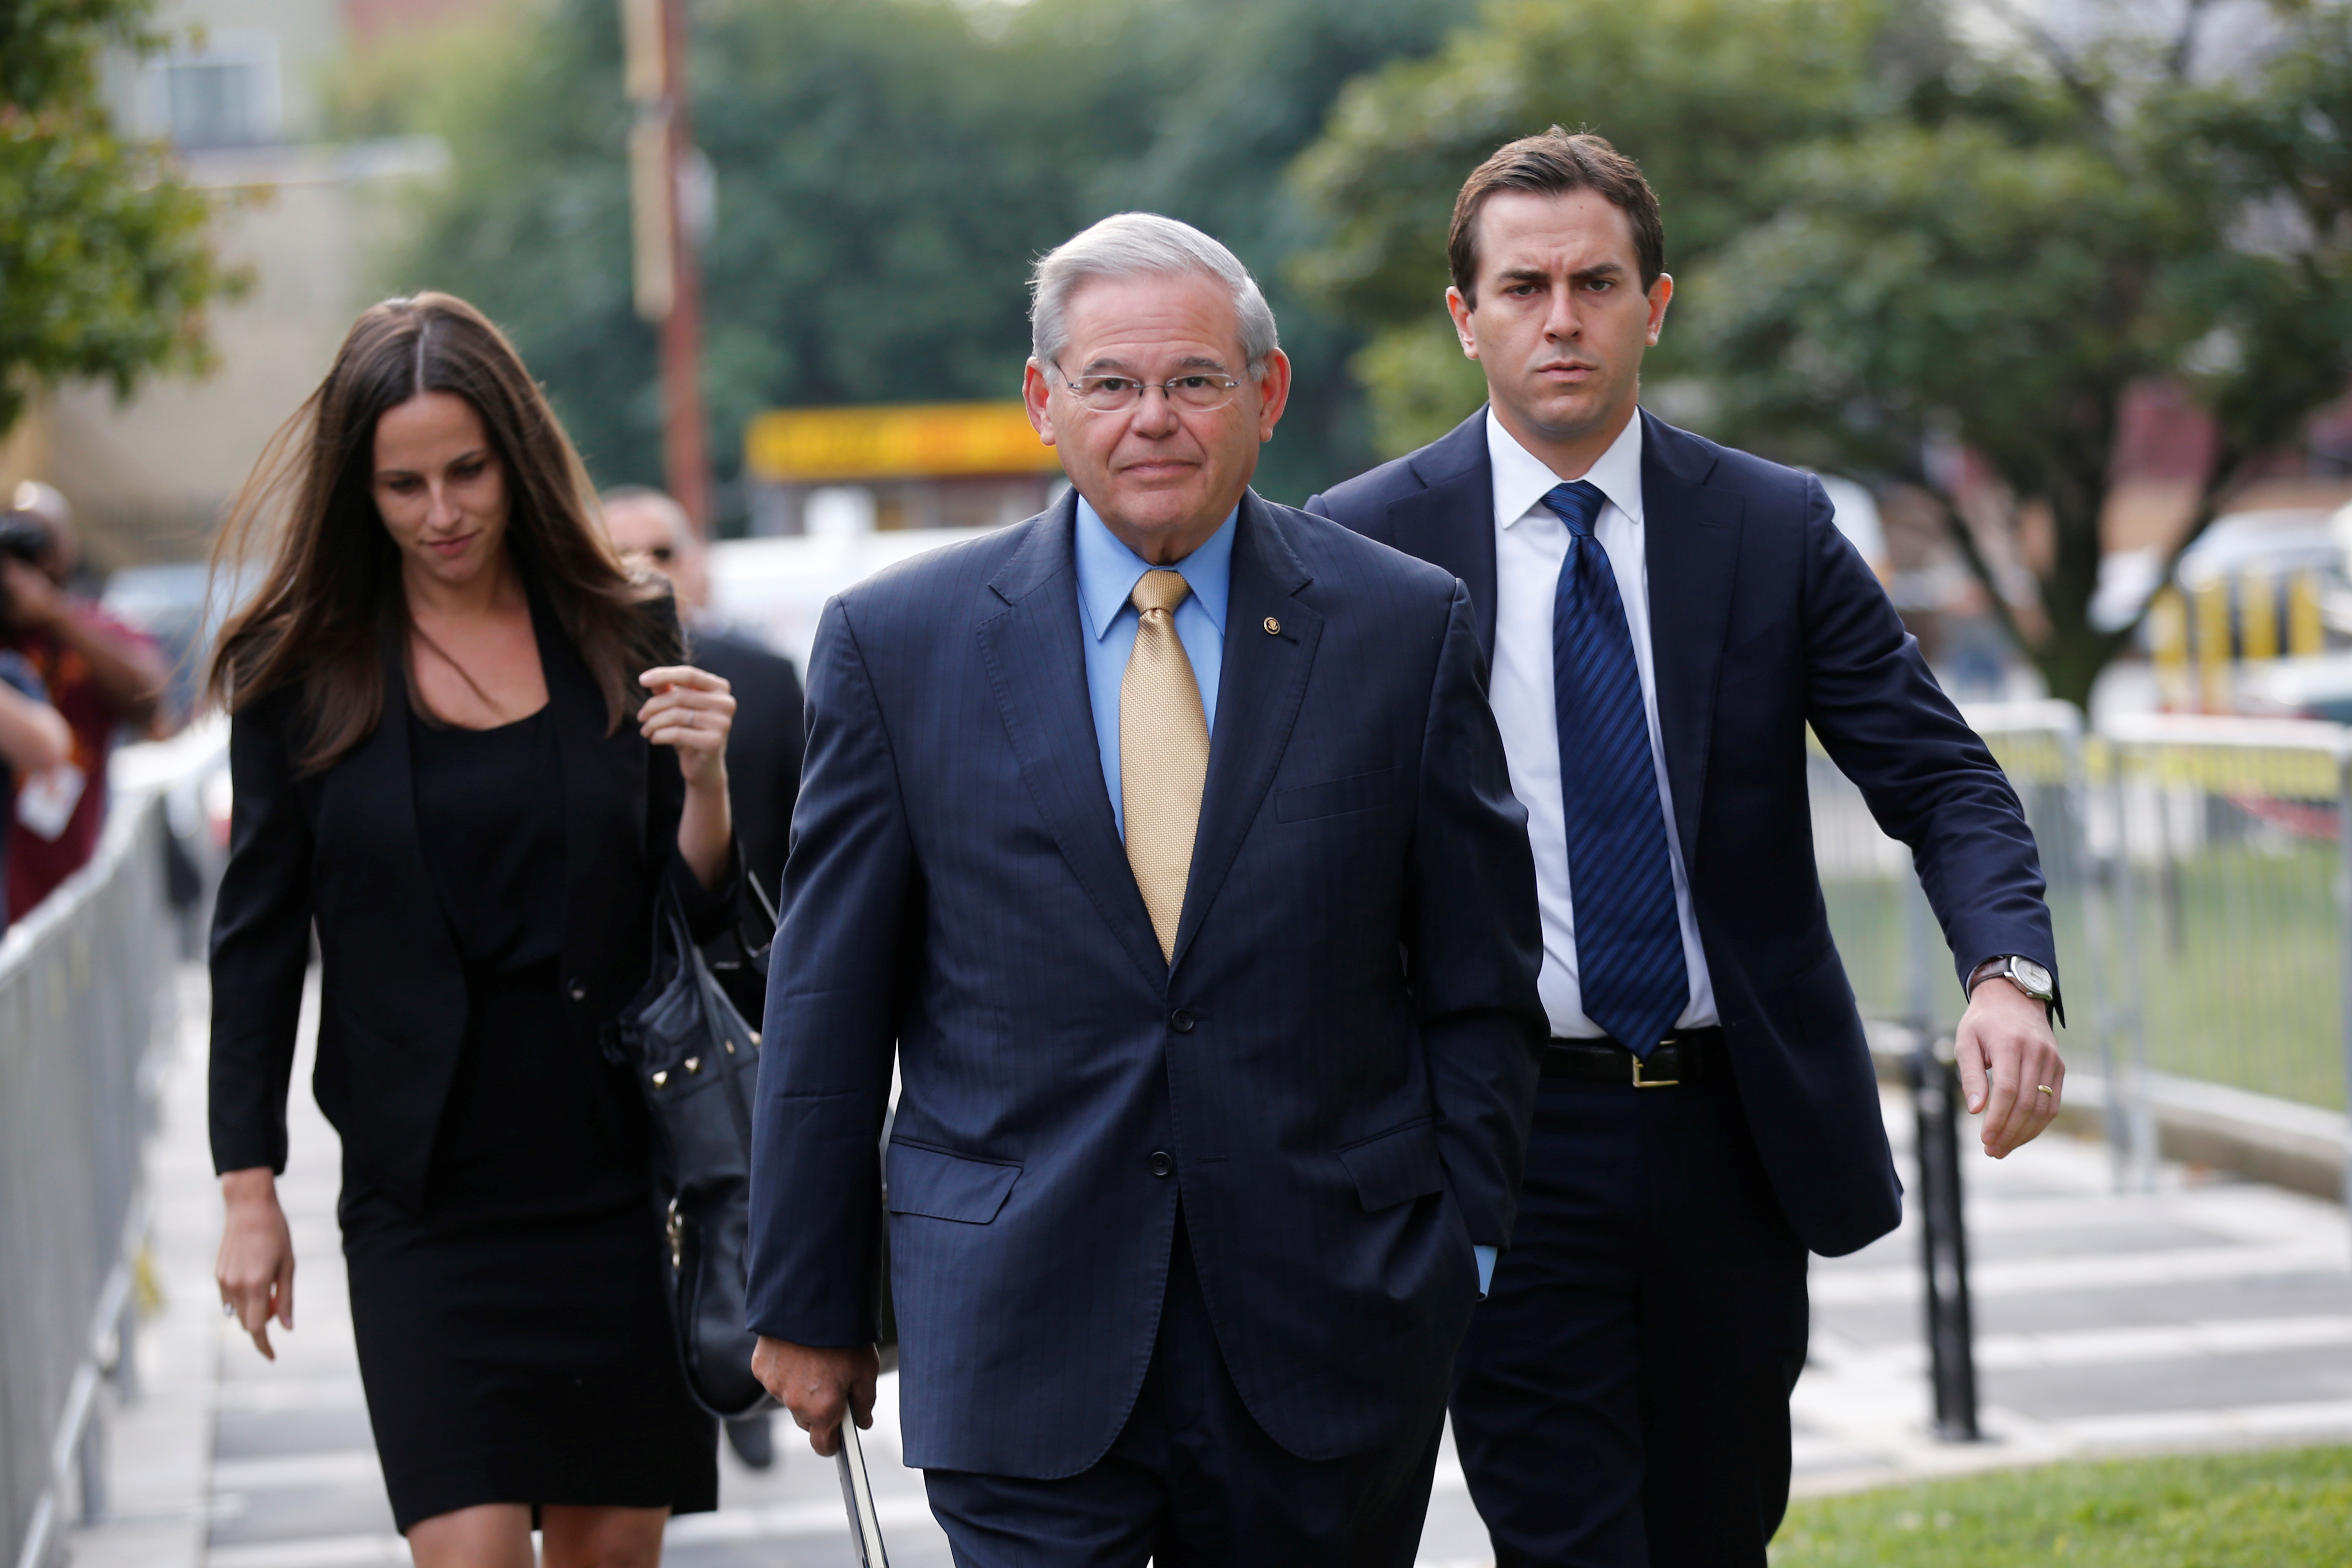 Senator Bob Menendez (C) arrives to face trial for federal corruption charges with his children Alicia Menendez (L) and Robert Melendez, Jr. (R) at United States District Court for the District of New Jersey in Newark, New Jersey, U.S., September 6, 2017. REUTERS/Joe Penney